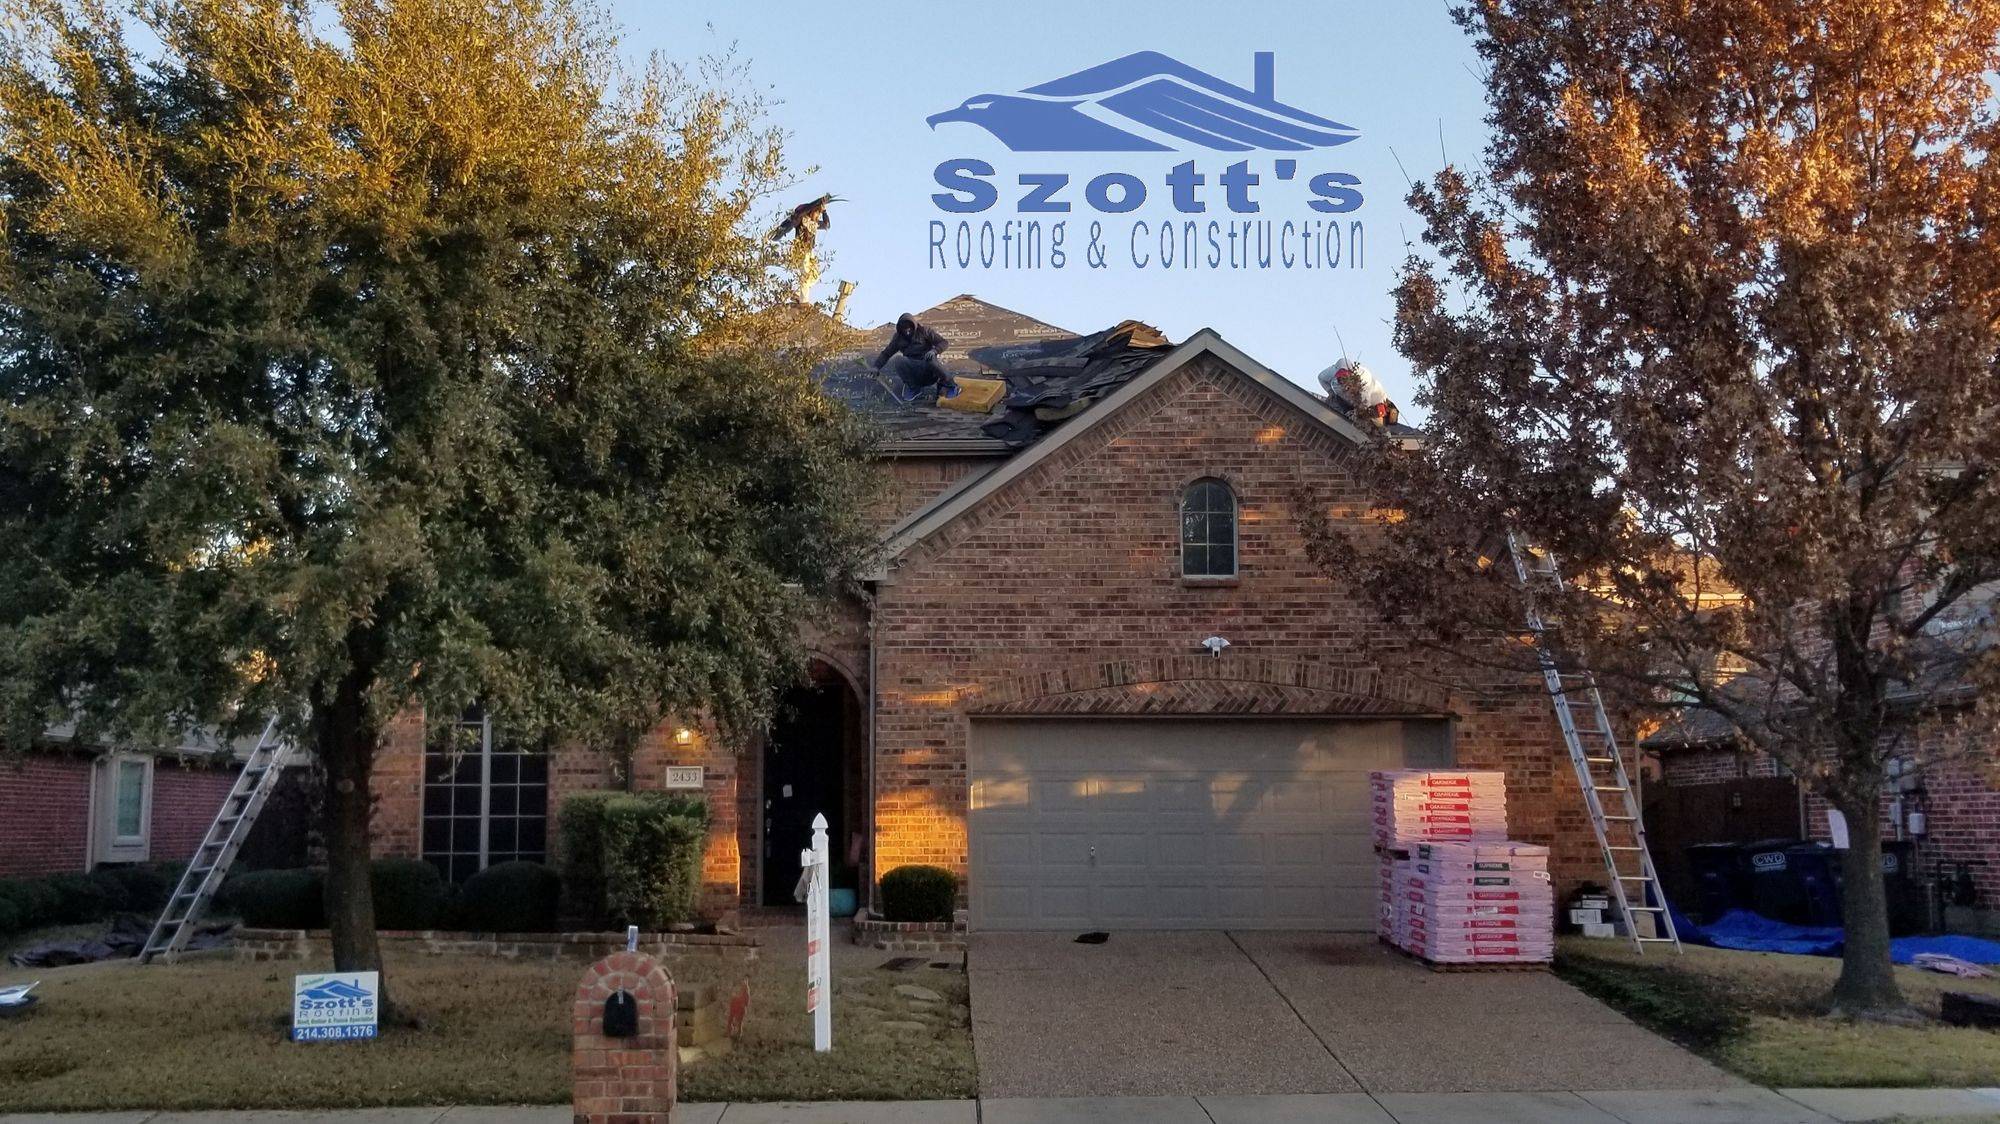 Little elm Frisco roof replacement Free roof estimates Free roof inspections. Roofs, Roofing contractor, Roof repair, Hail damage, Insurance claims roofer near me Little elm frisco the colony prosper mckinney celina plano southlake lewisville wylie Gutters, Windows and Fence